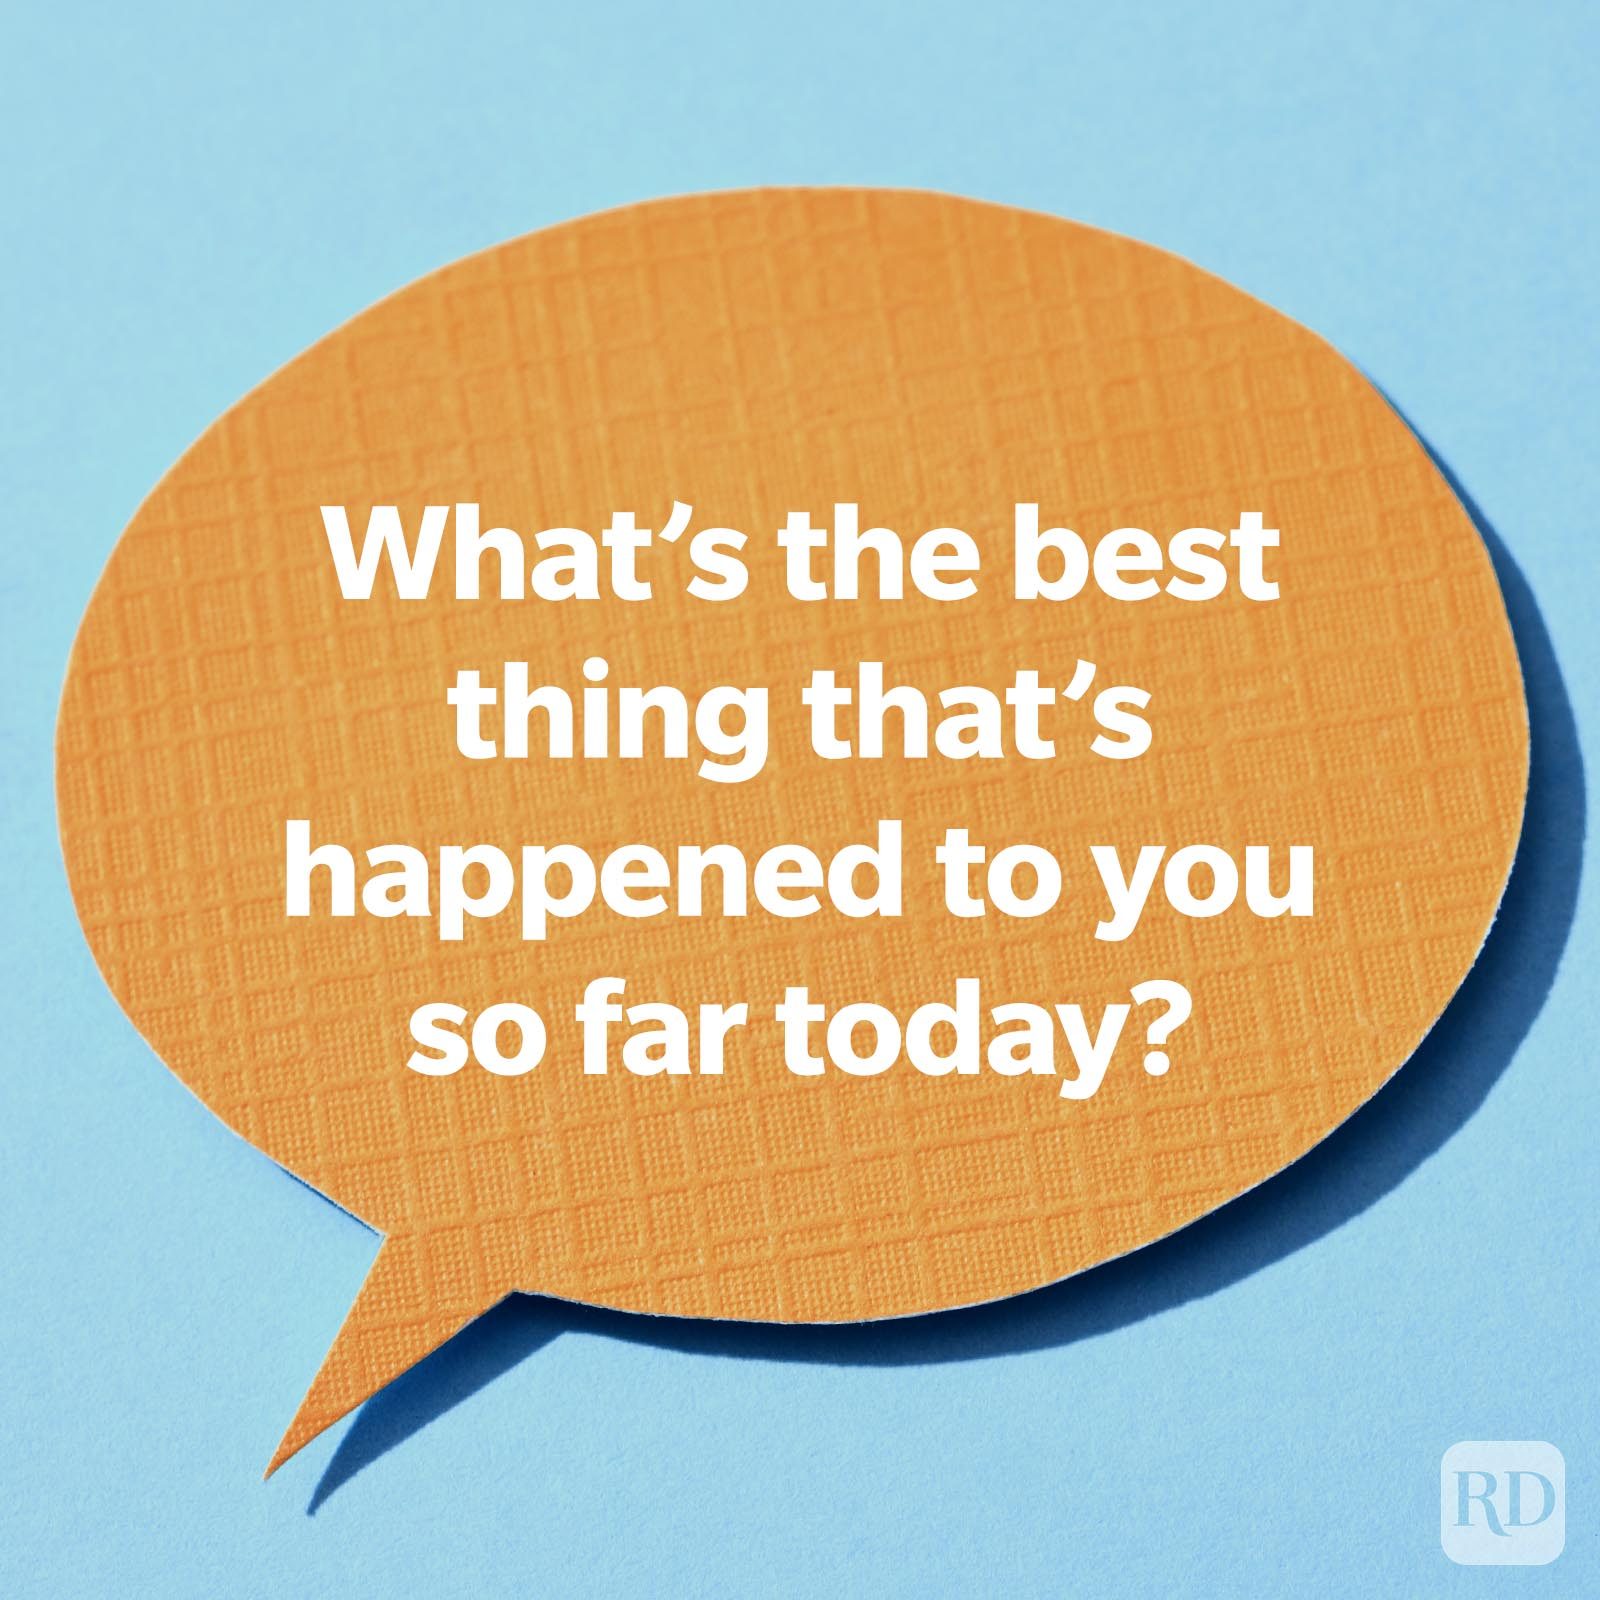 What's the best thing that's happened to you so far today?